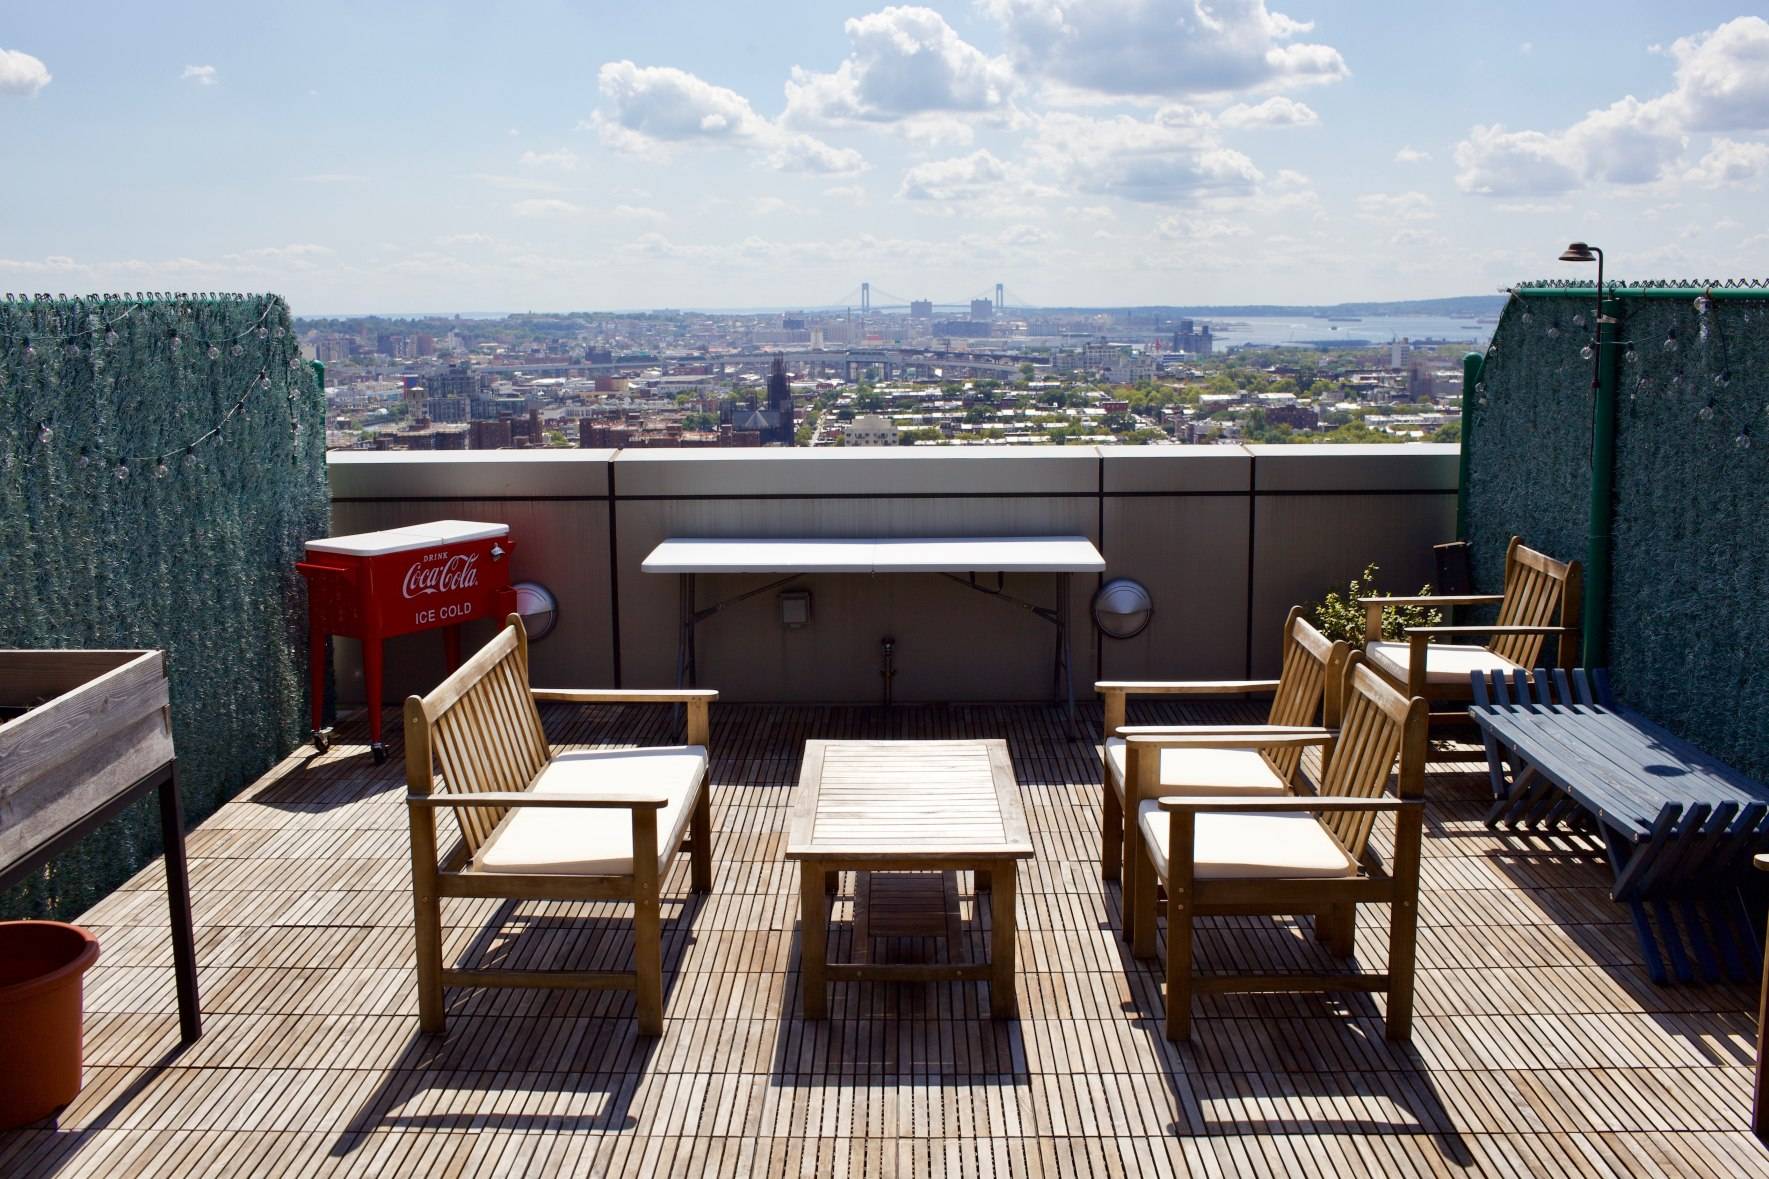 A spectacular corner 2 bedroom 2 bath condo with breathtaking views of Brooklyn and a private rooftop cabana extra 200 mo !